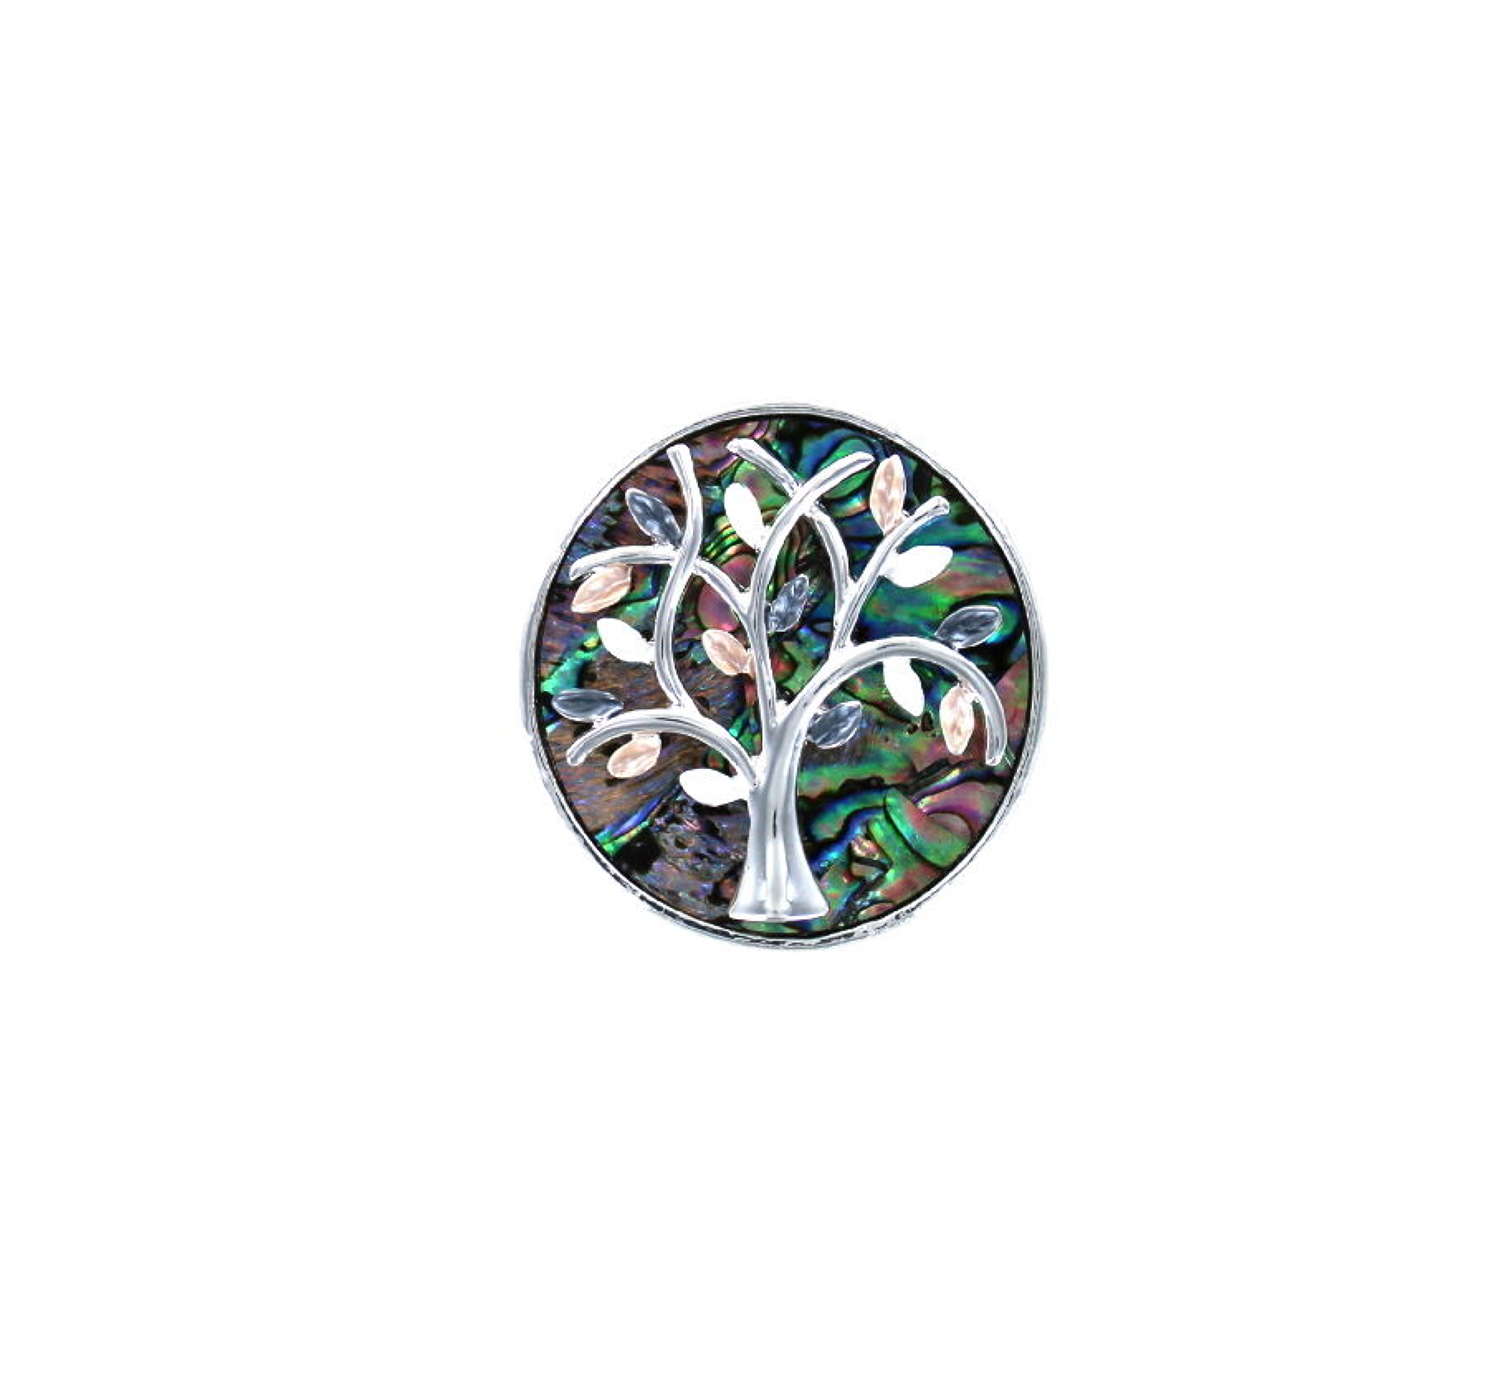 Abalone tree of life magnetic brooch.